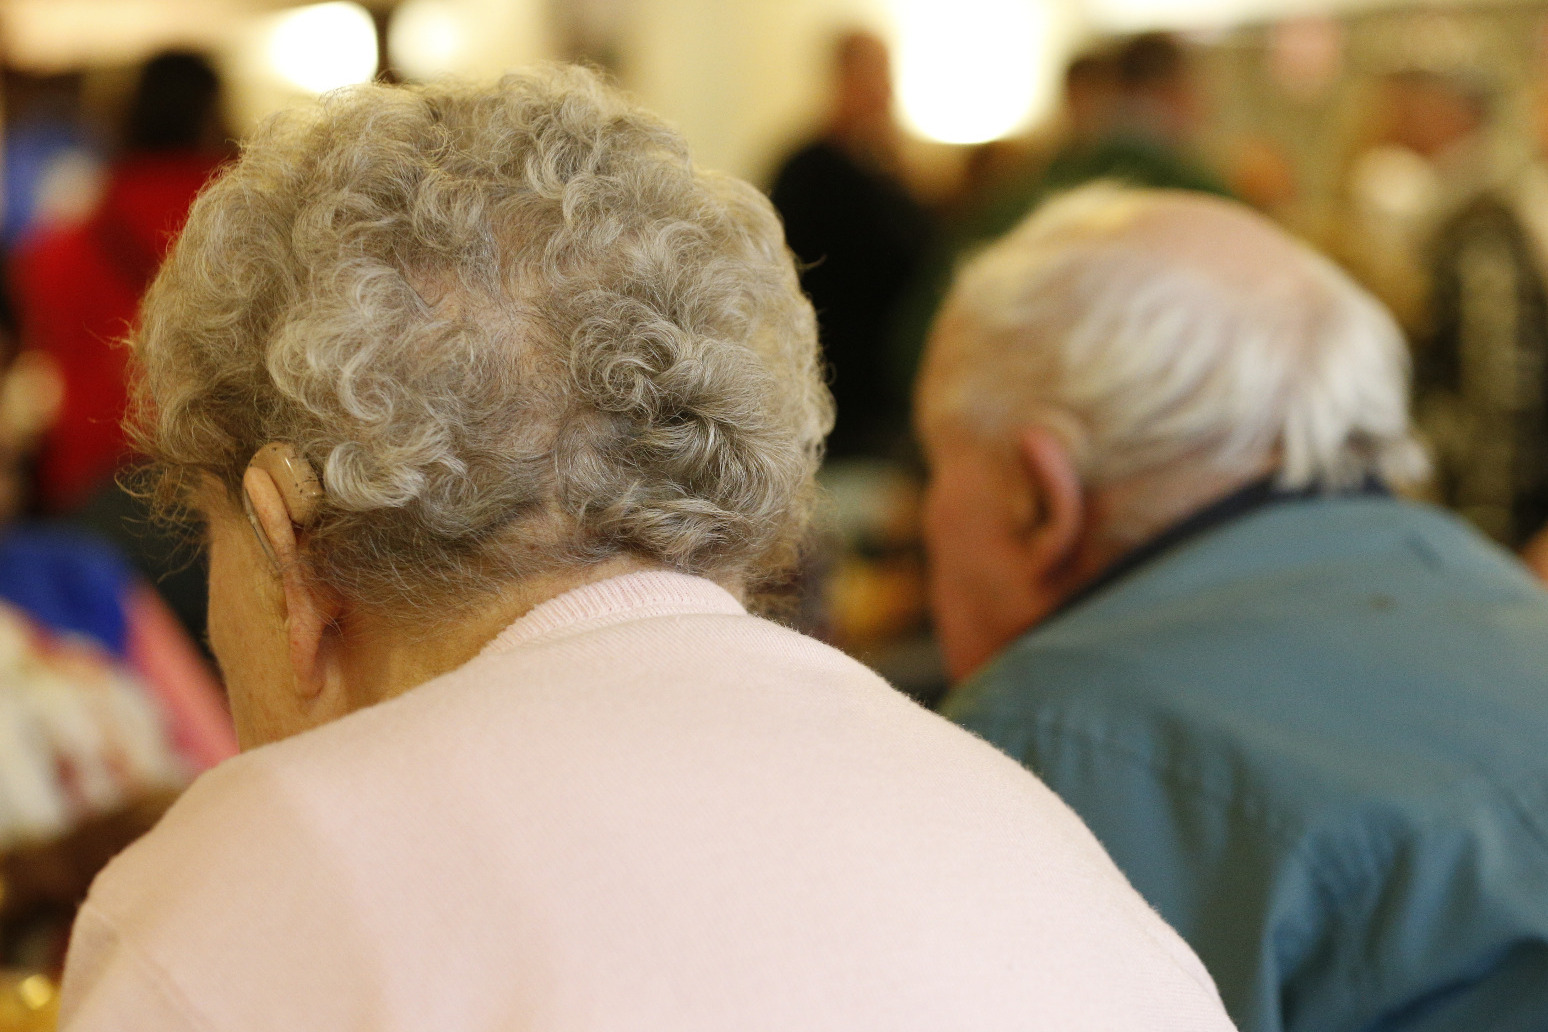 Older people ‘continually missing out on vital mental health support’ 